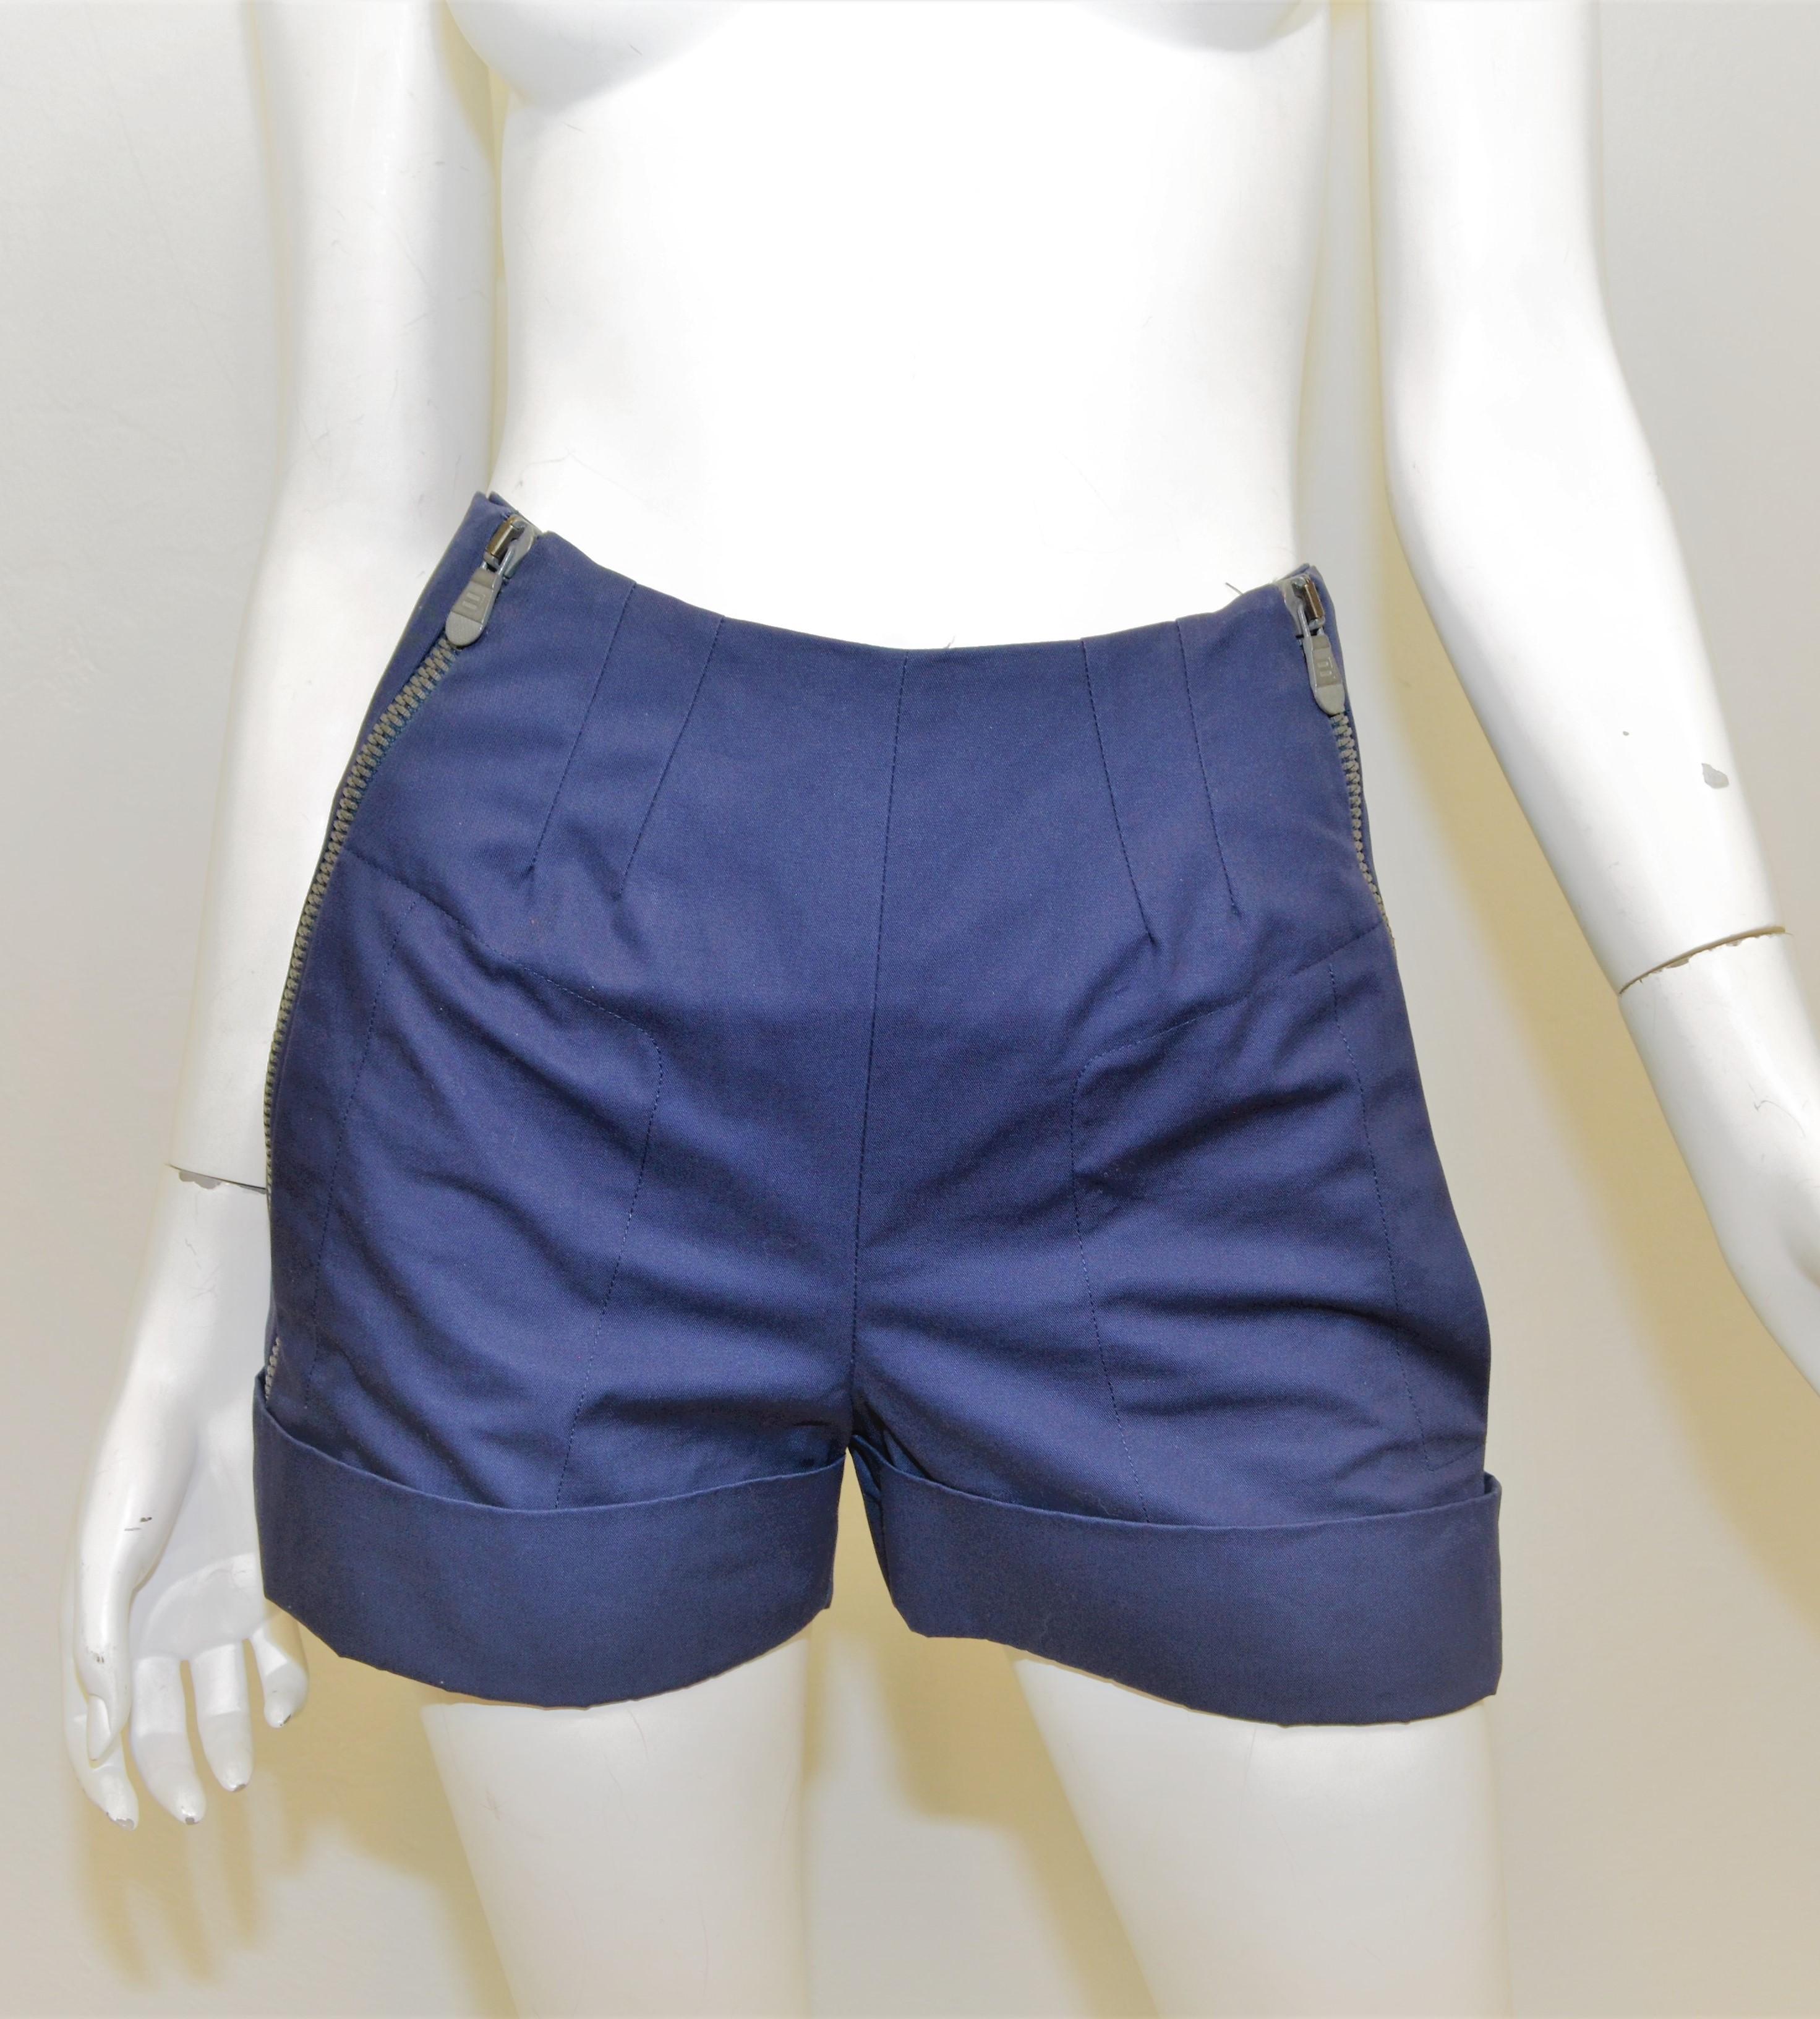 Balenciaga Zip Waist Shorts are featured in a navy blue color with matte silver-tone zippers and decorative back pockets, cuffed hem. Shorts are labeled size 38, made in Italy. Excellent condition with normal/light wear. 

Measurements:
waist 30'',